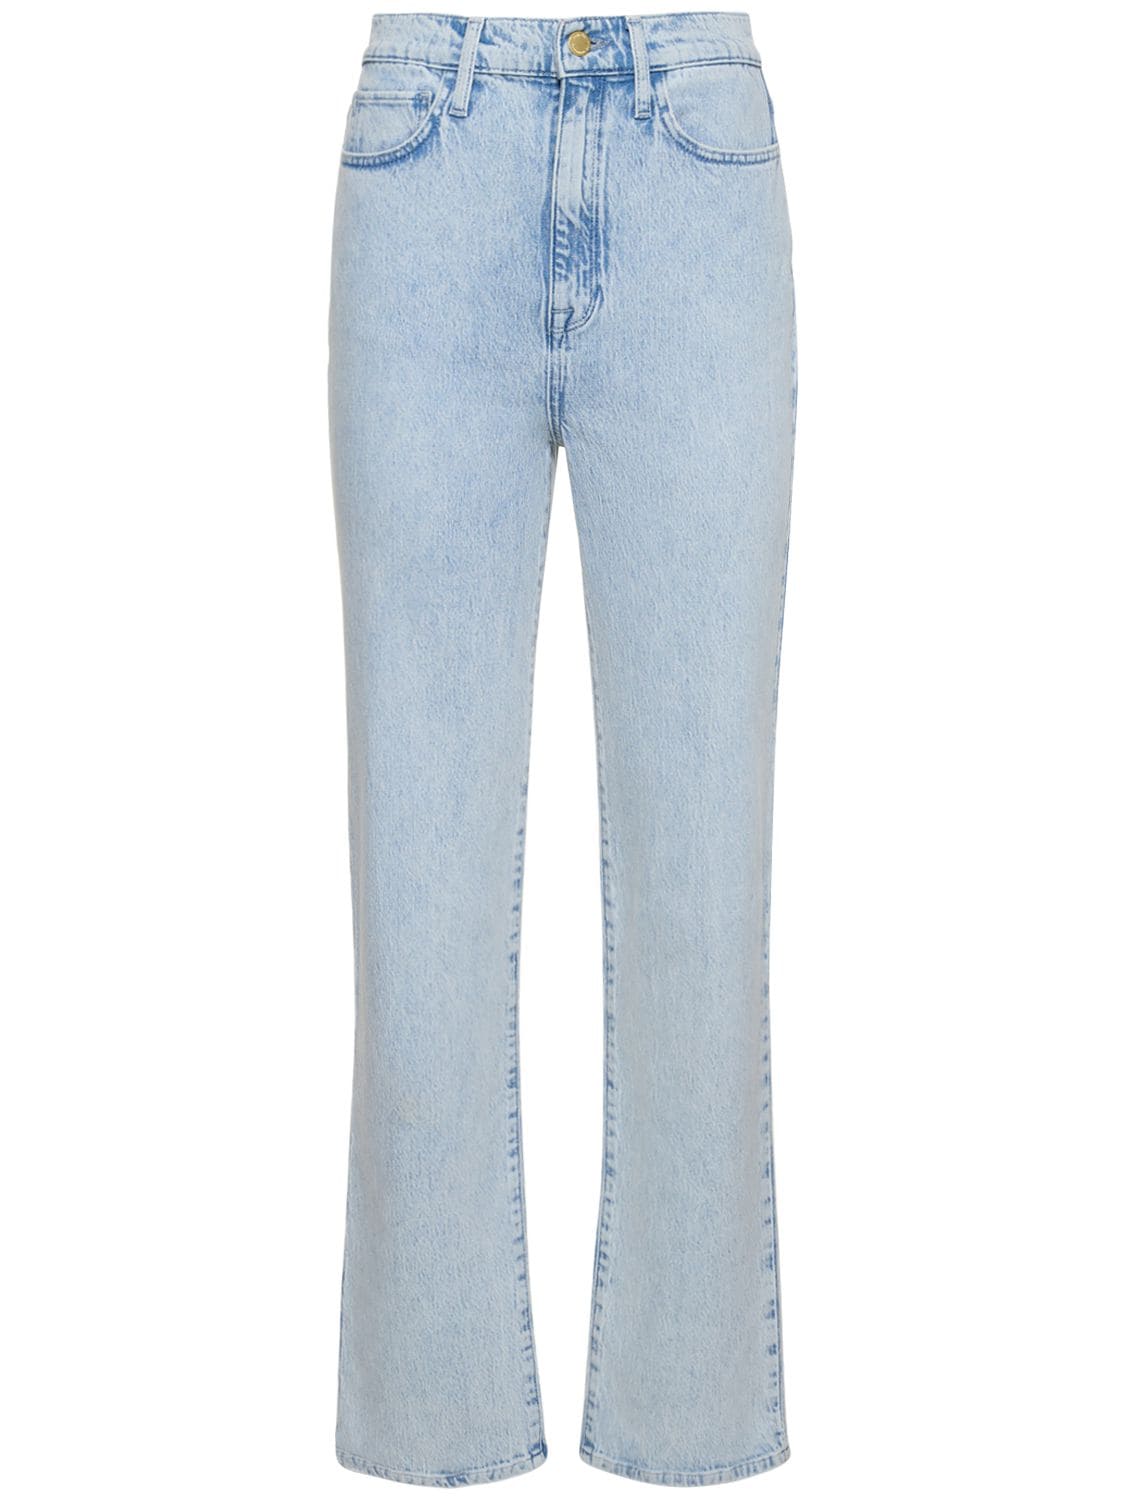 Image of Ms. Triarchy High Rise Denim Jeans